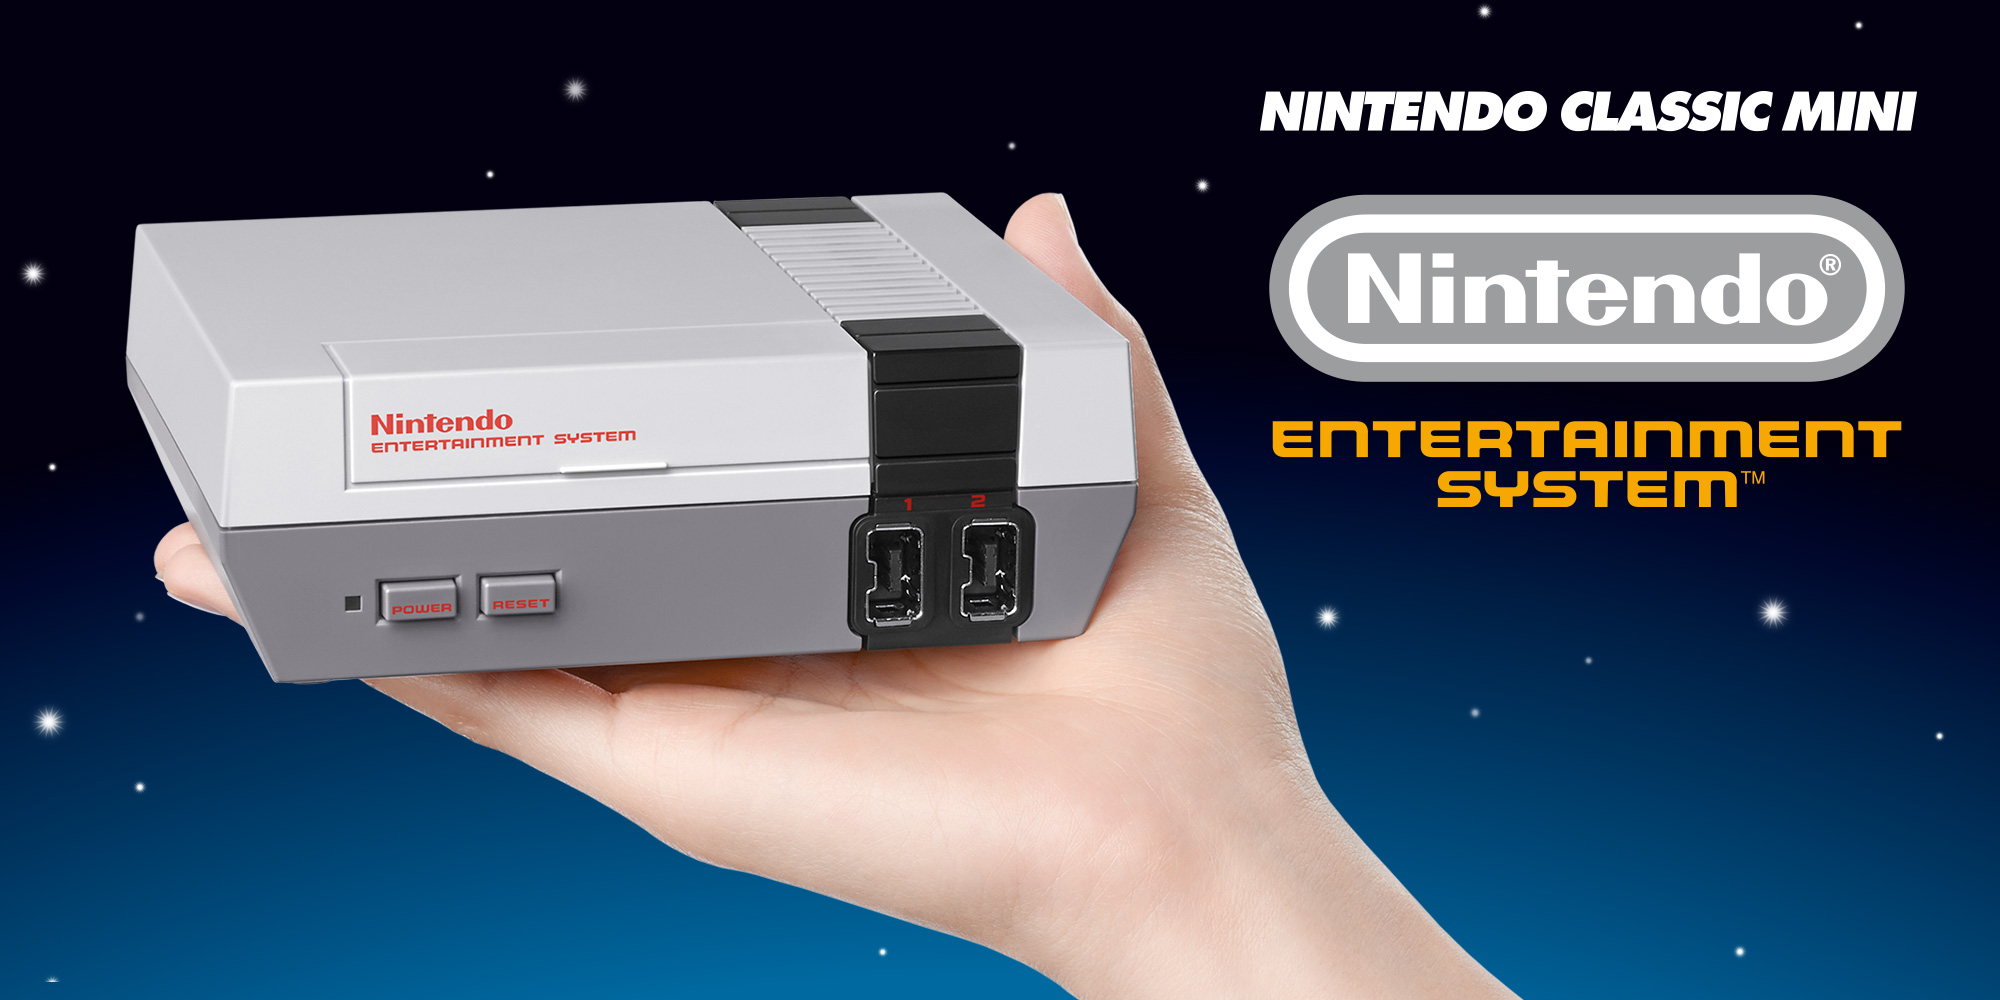 Nintendo Nintendo Entertainment System launches 11th November and includes classic NES games | News | Nintendo